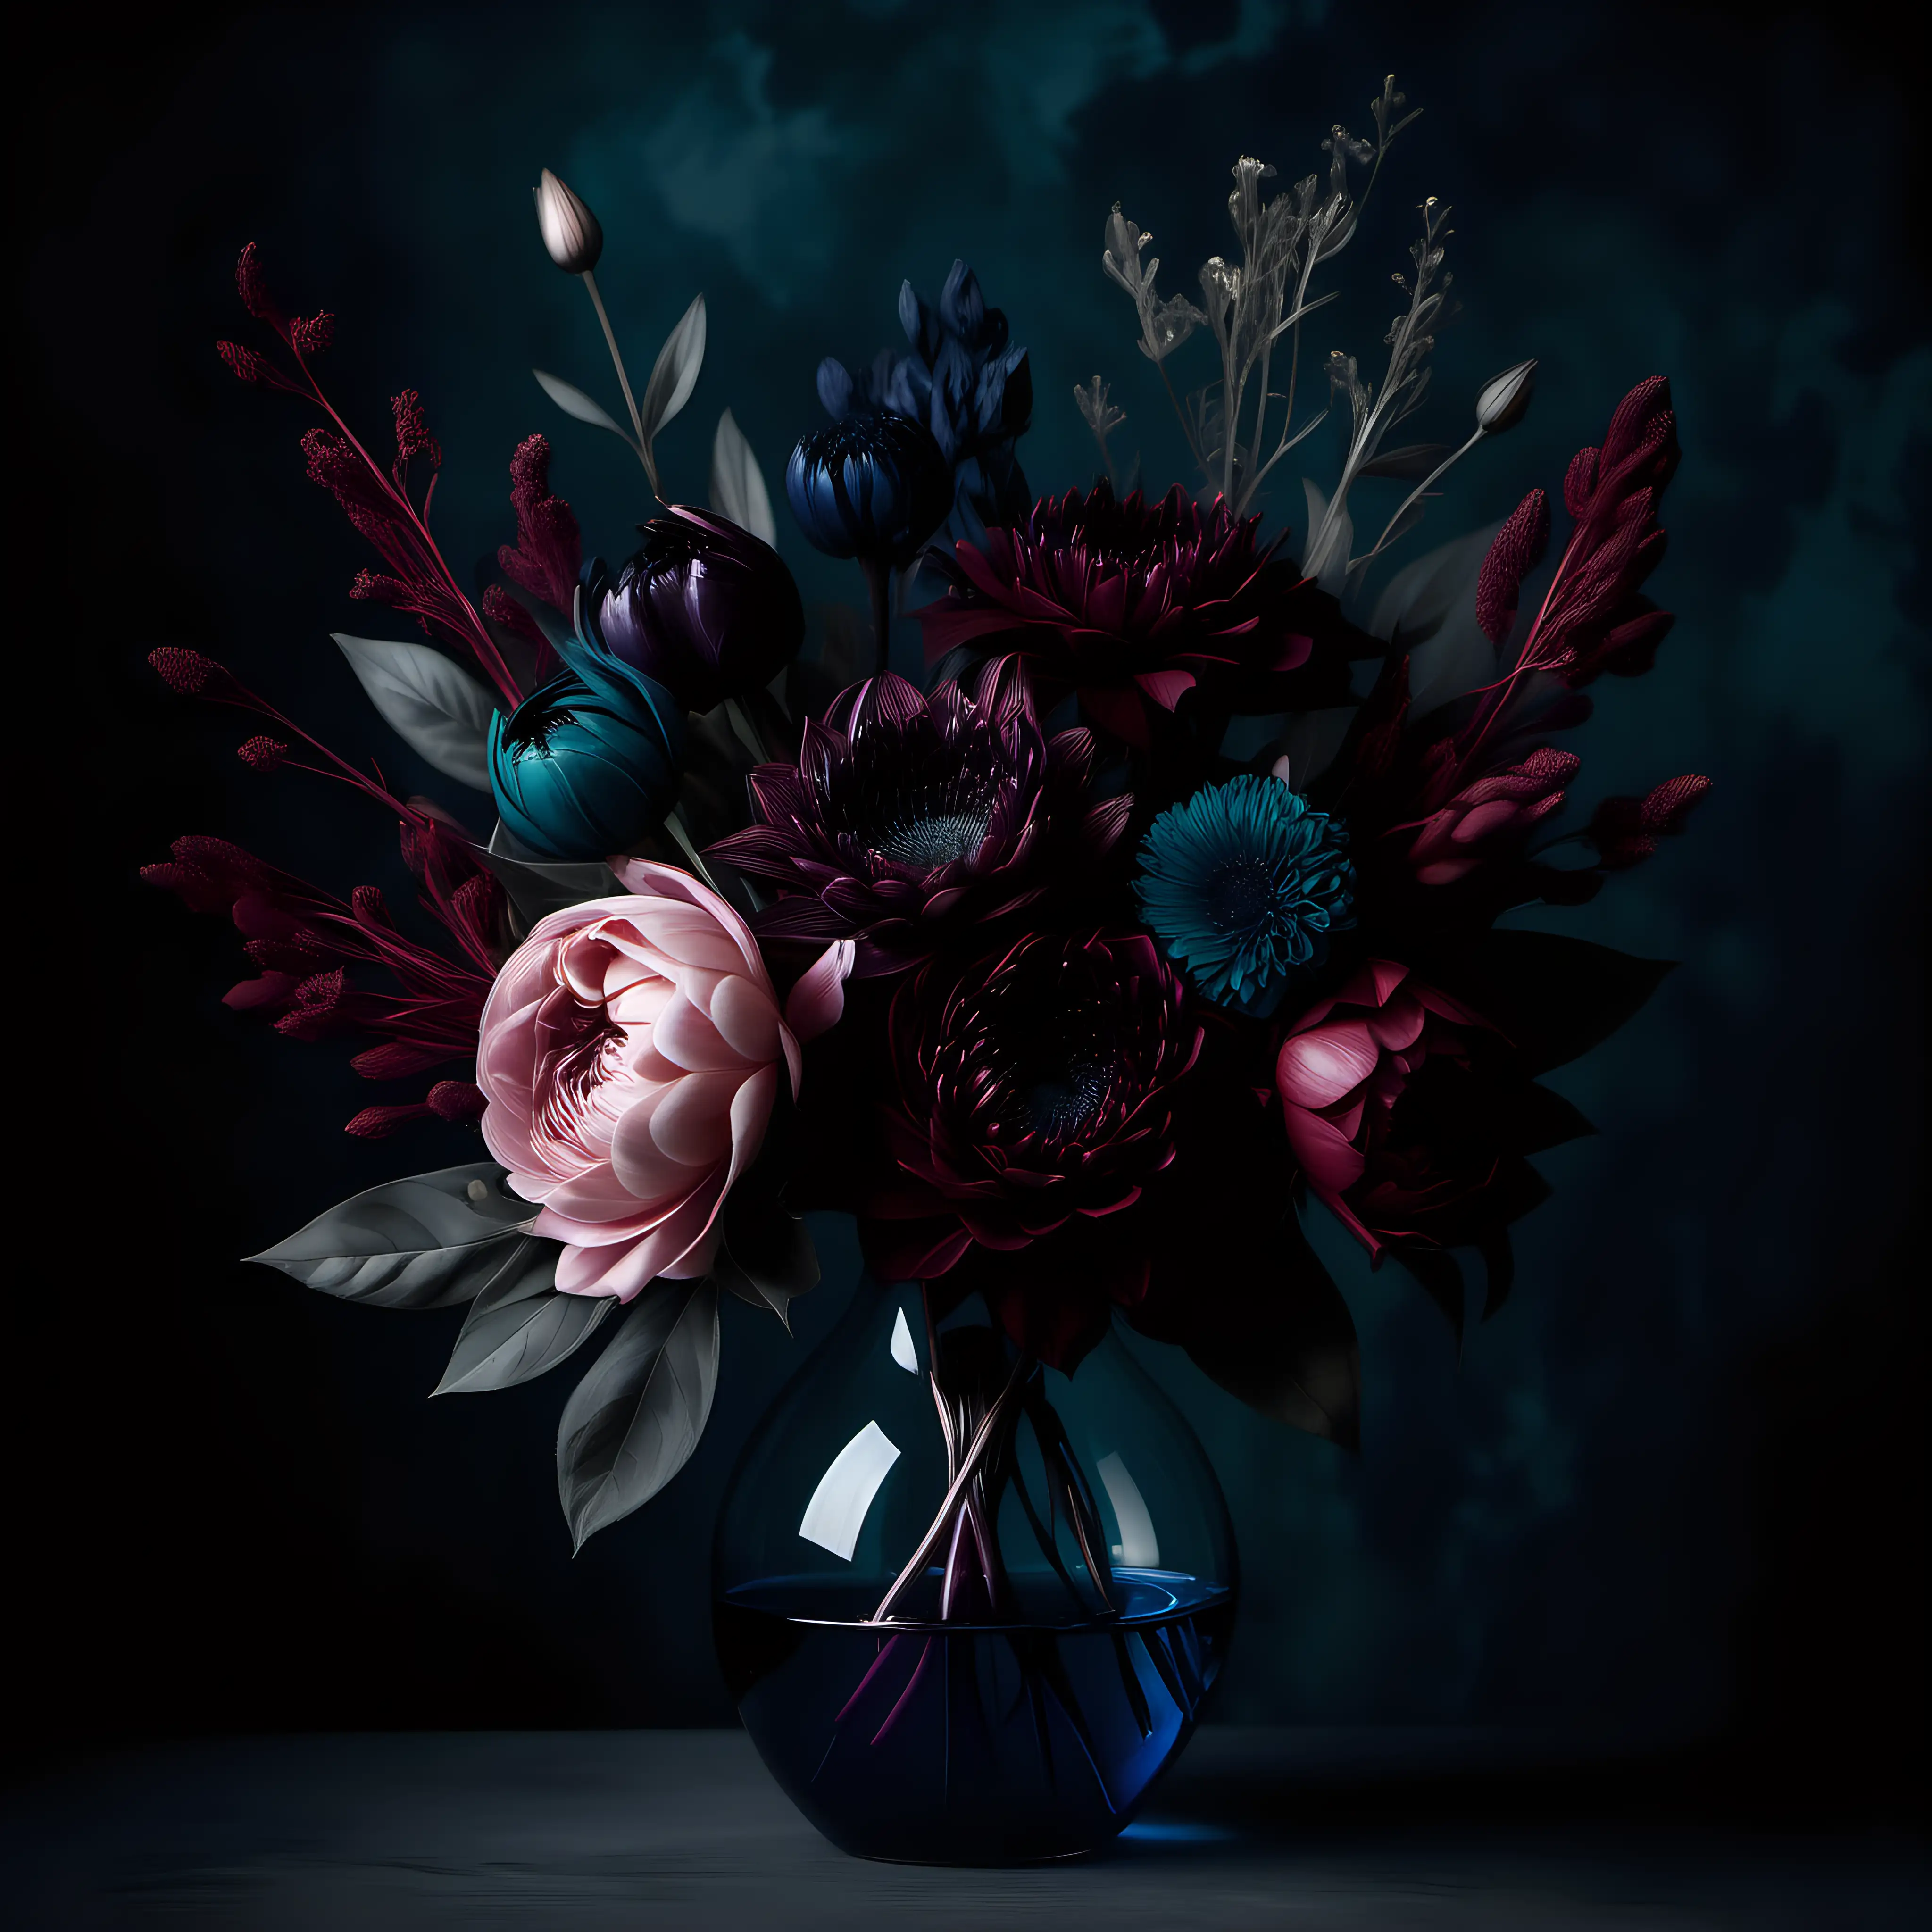 Dark Floral Bouquet in HighQuality Photo Print for Wall Art